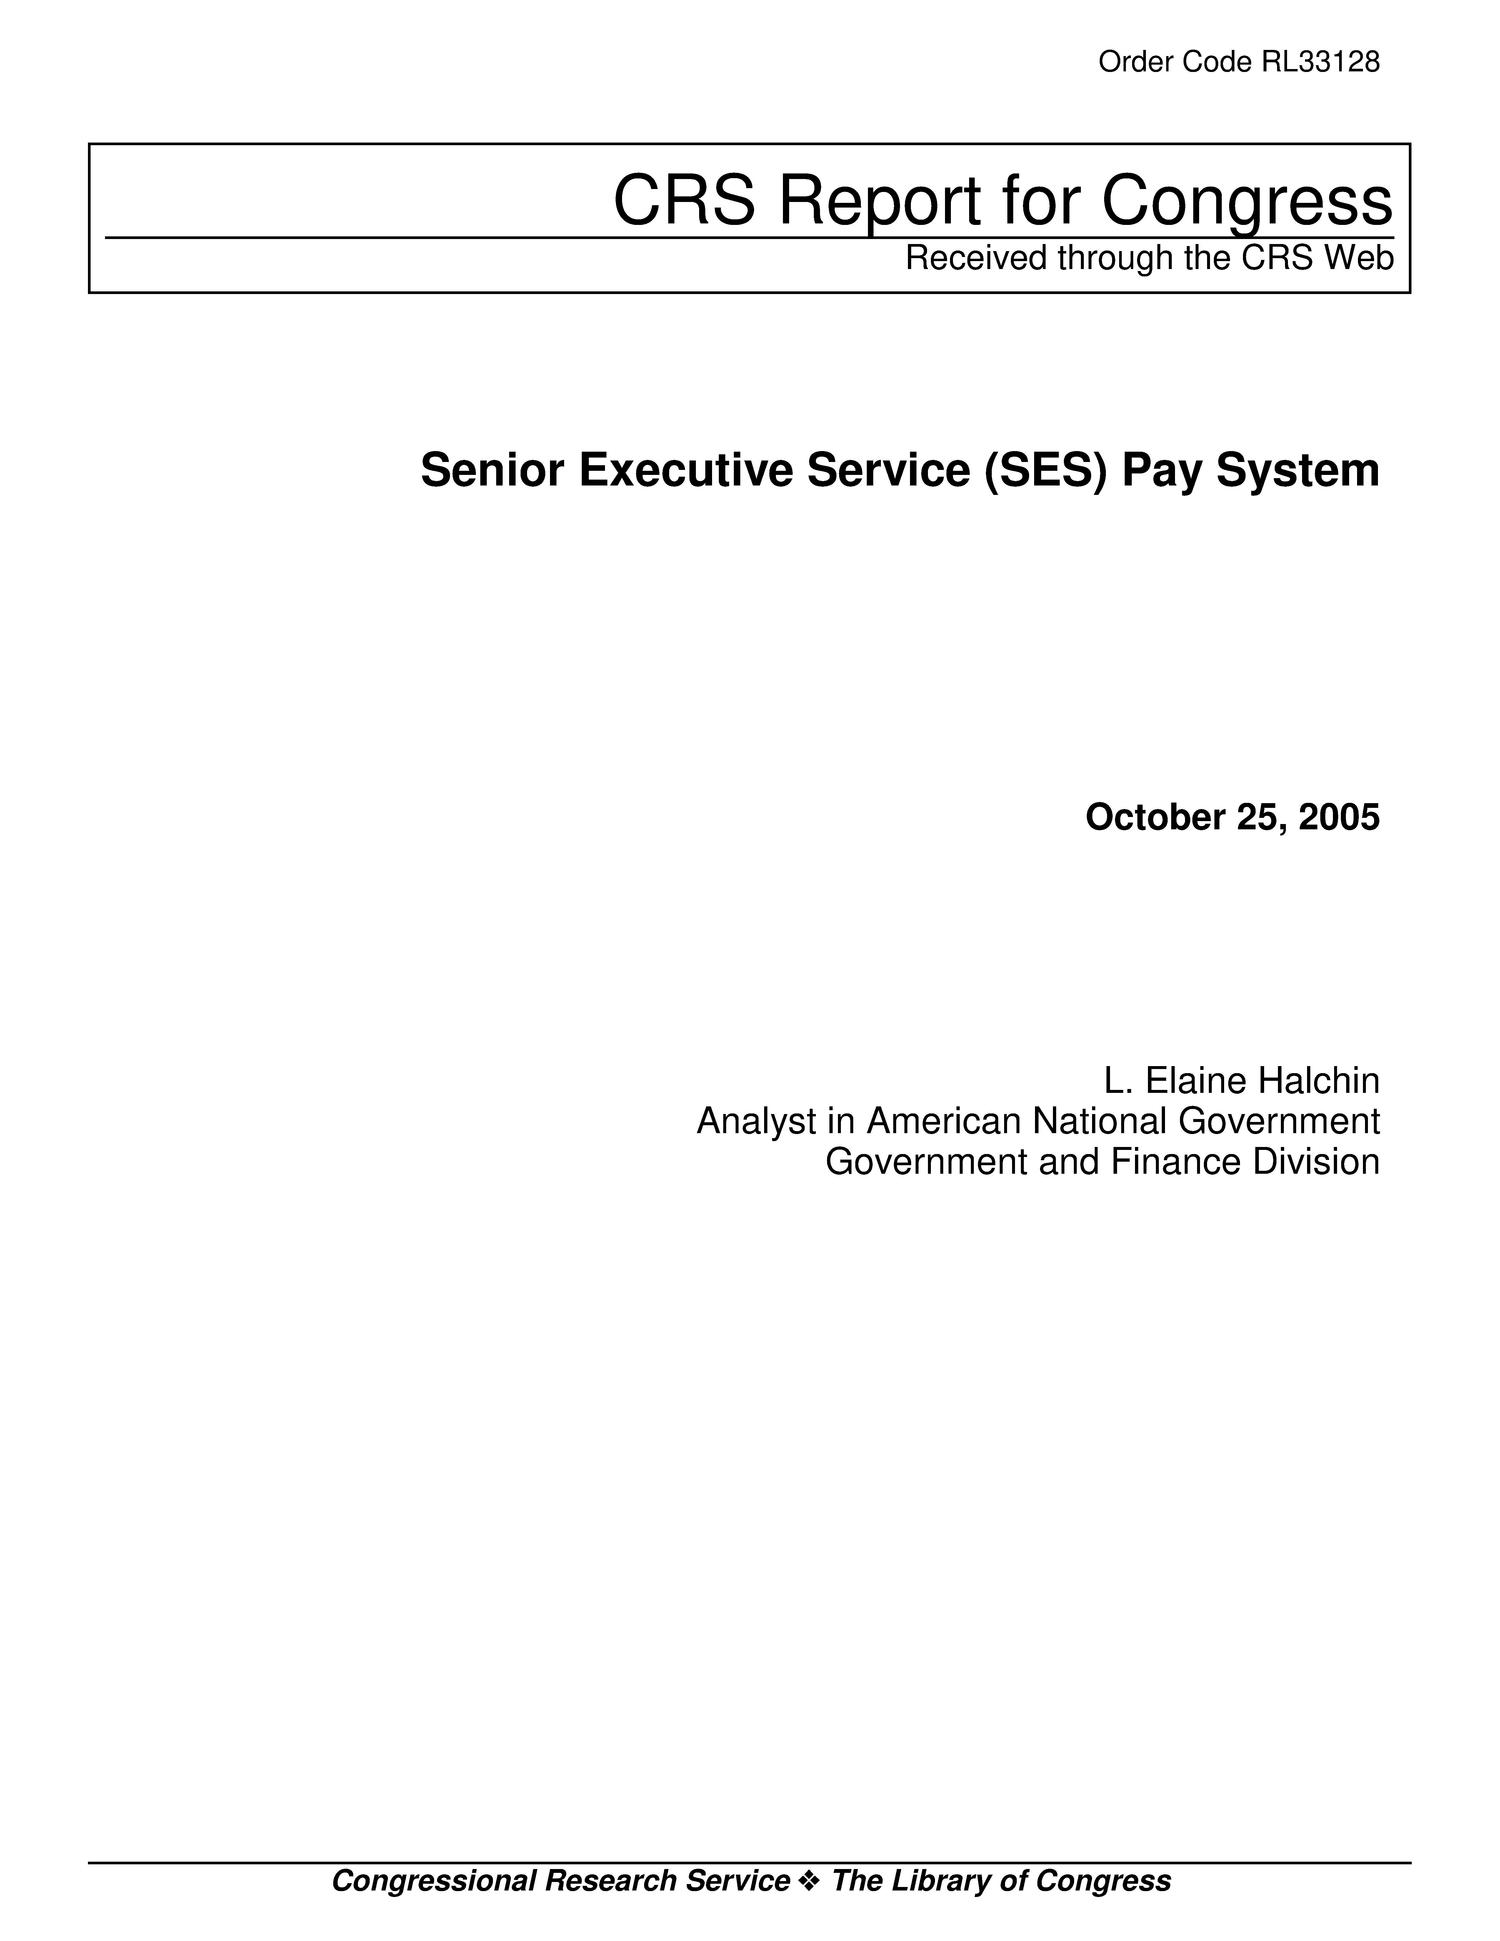 Senior Executive Service (SES) Pay System UNT Digital Library